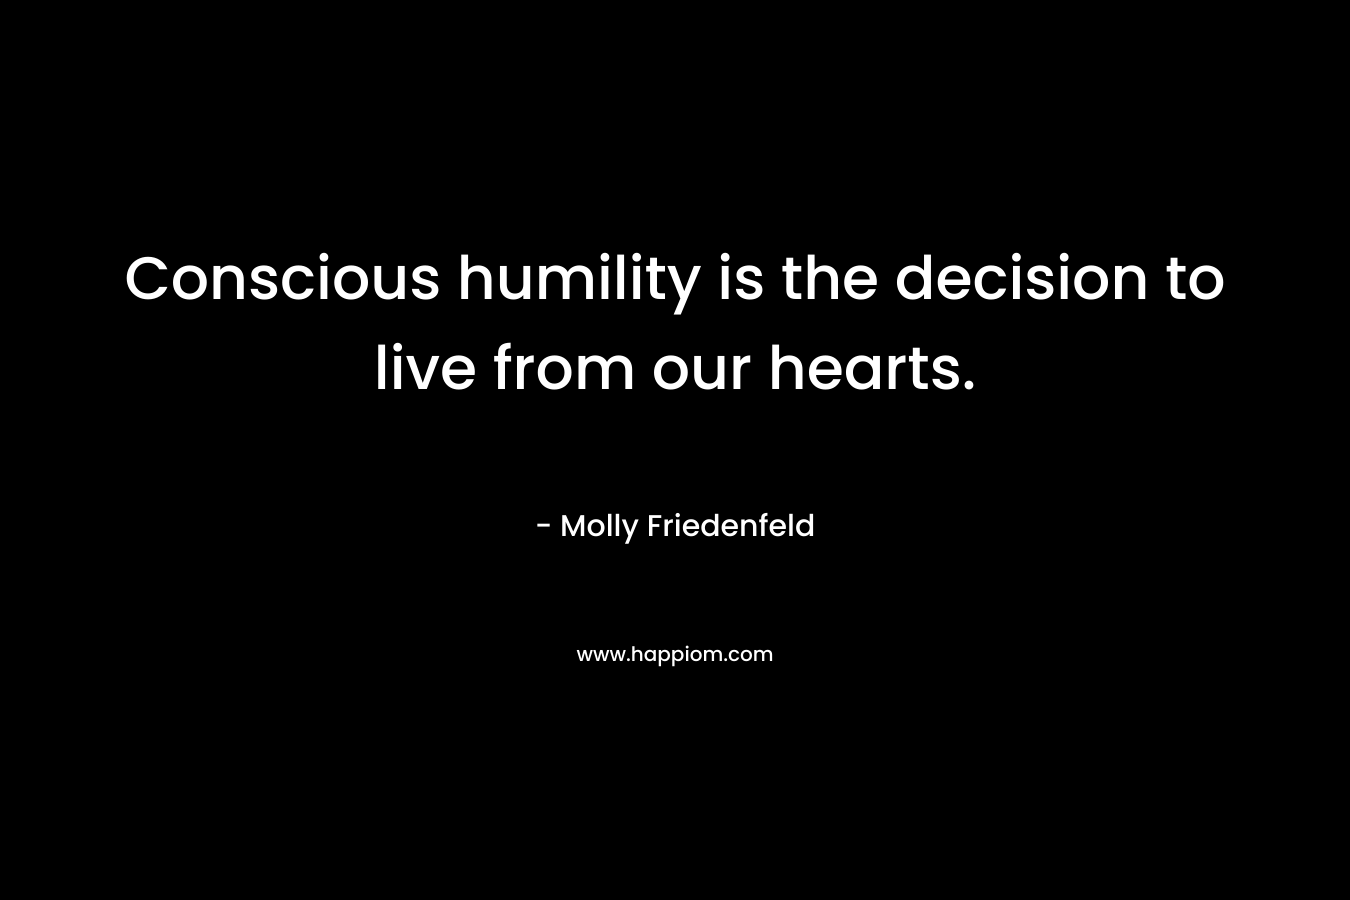 Conscious humility is the decision to live from our hearts. – Molly Friedenfeld